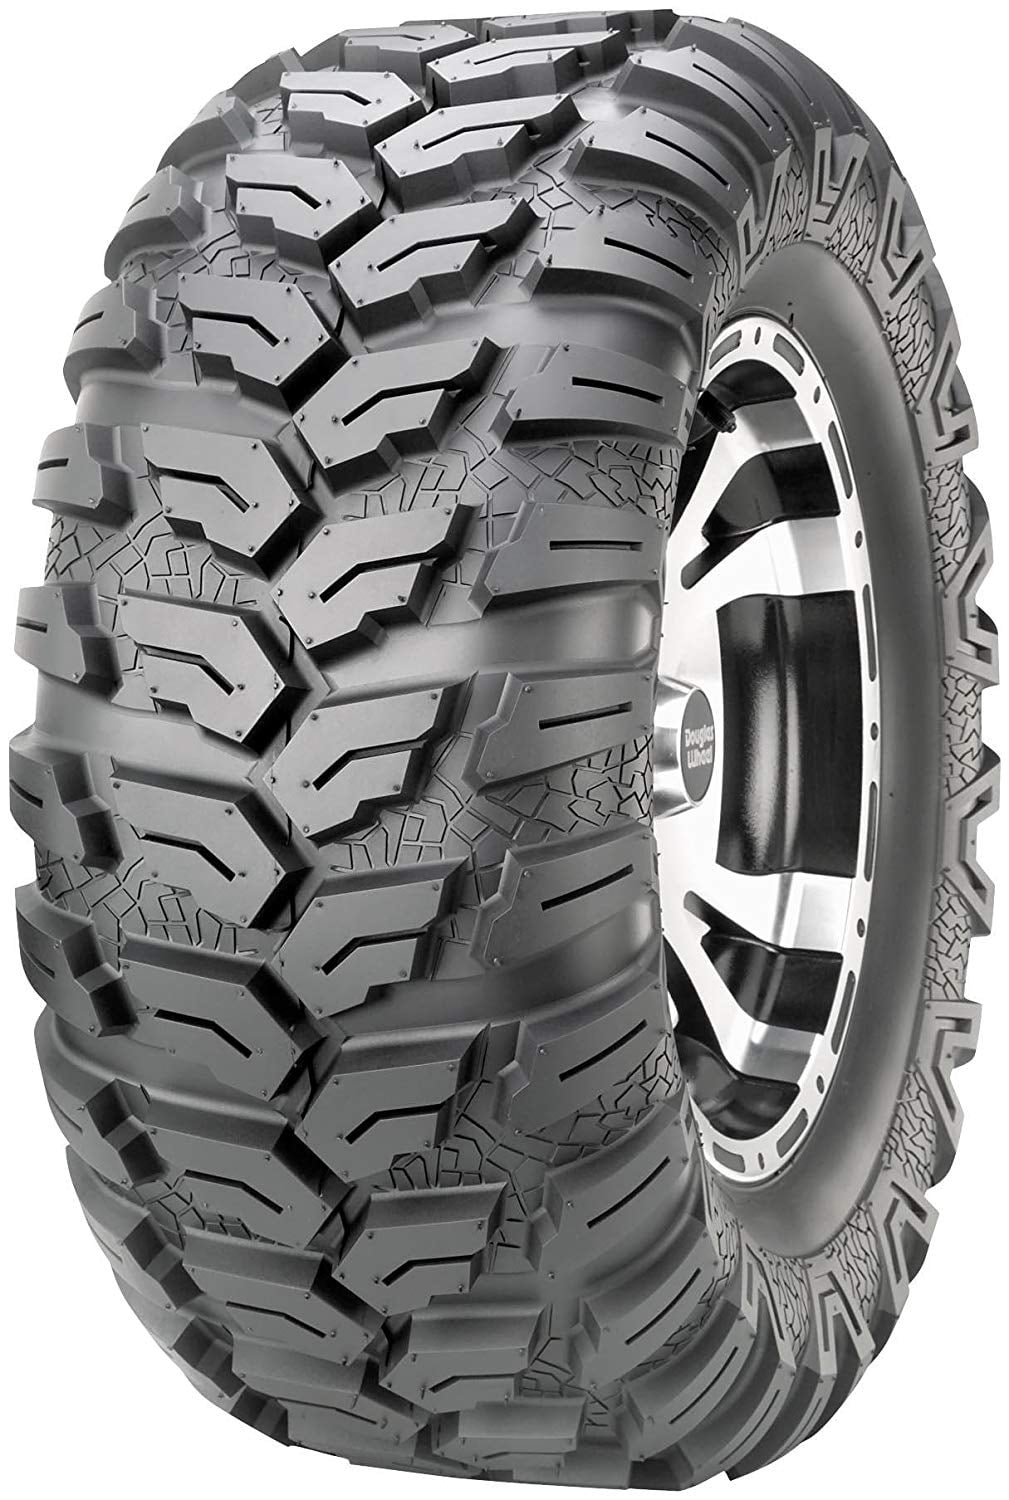 Maxxis MU07 Ceros, Front 27/9.00R15 C Tire